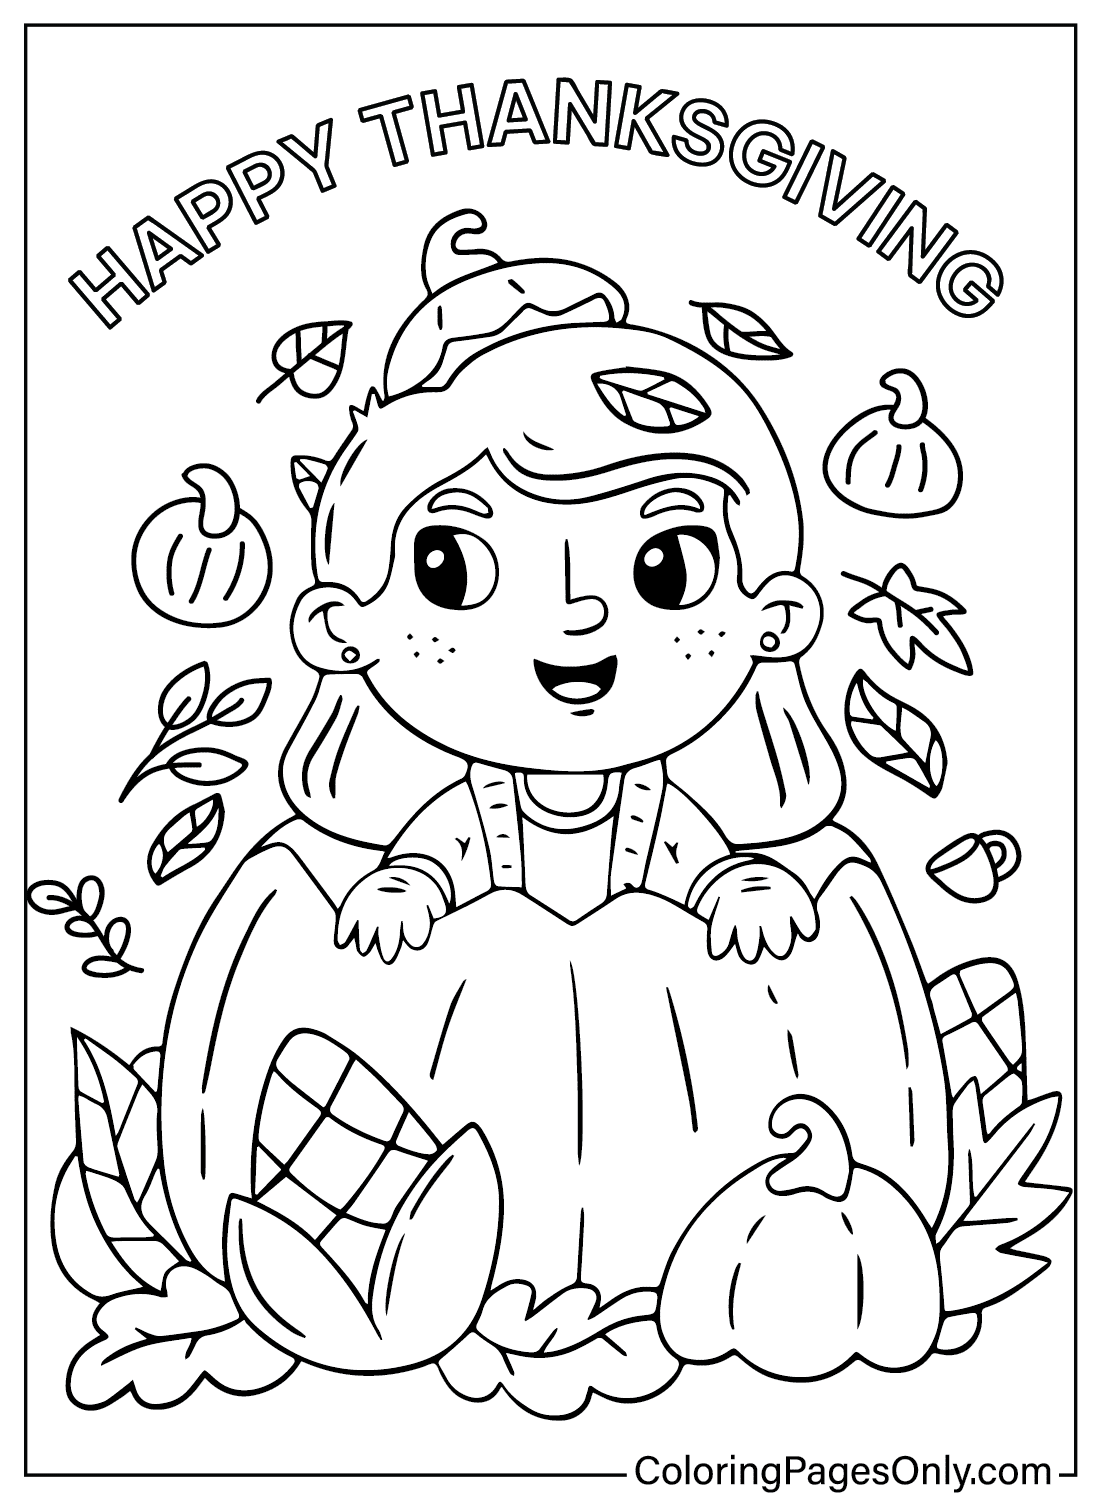 Free Thanksgiving Cartoon Coloring Page from I Am Thankful For